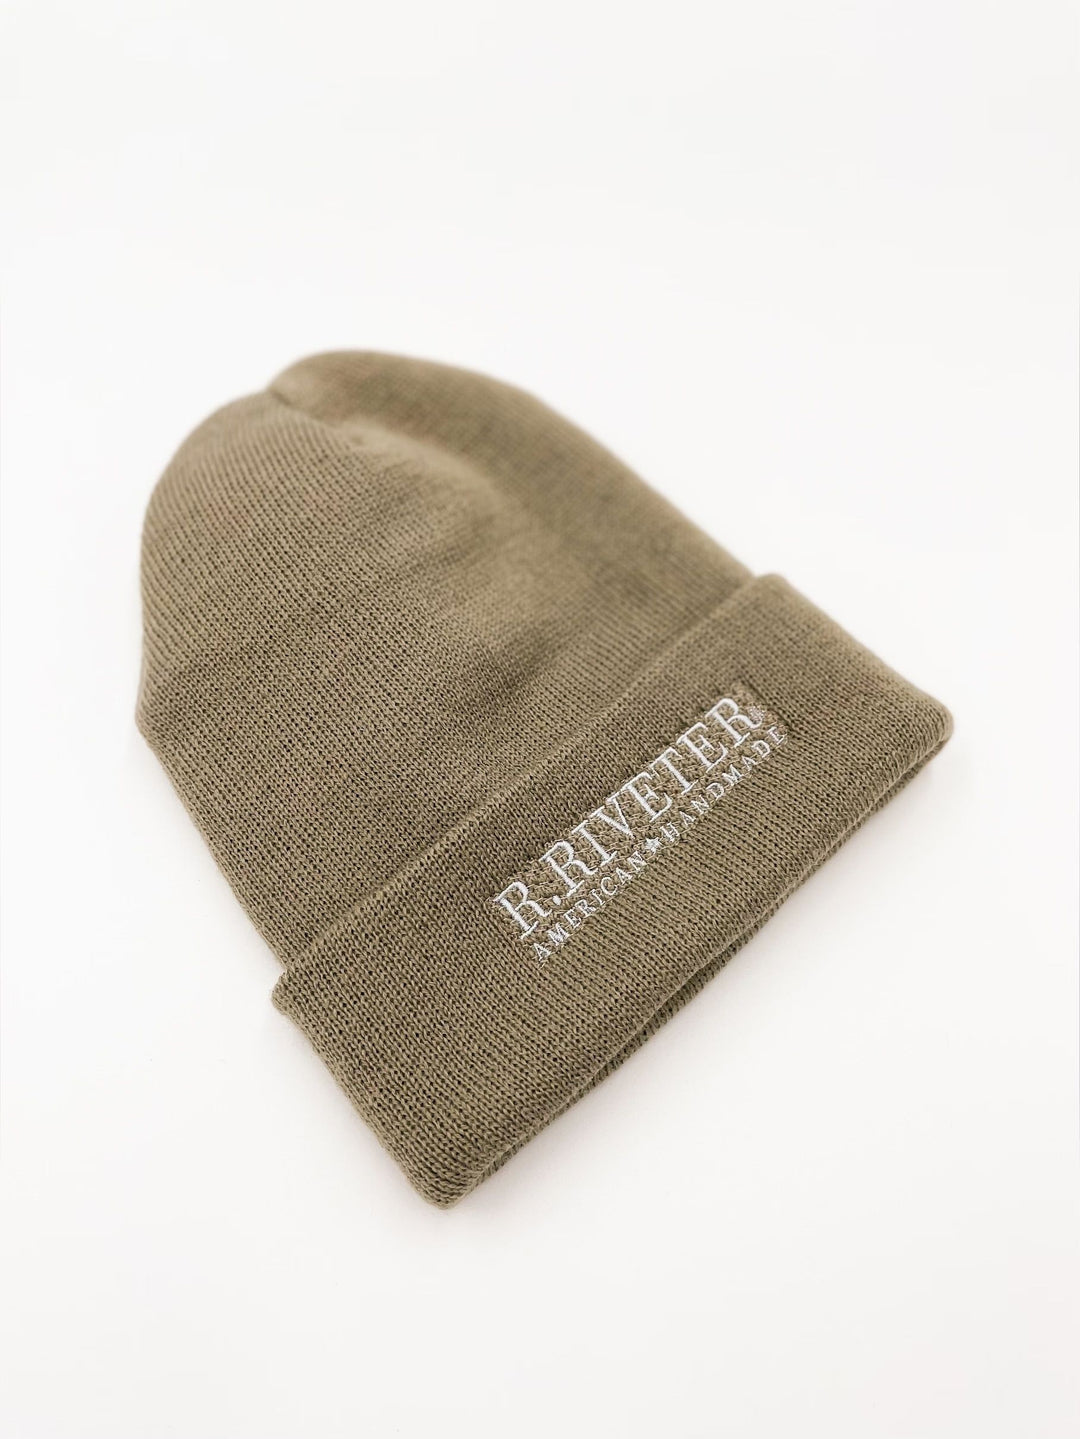 Authentically American | R.Riveter Beanie